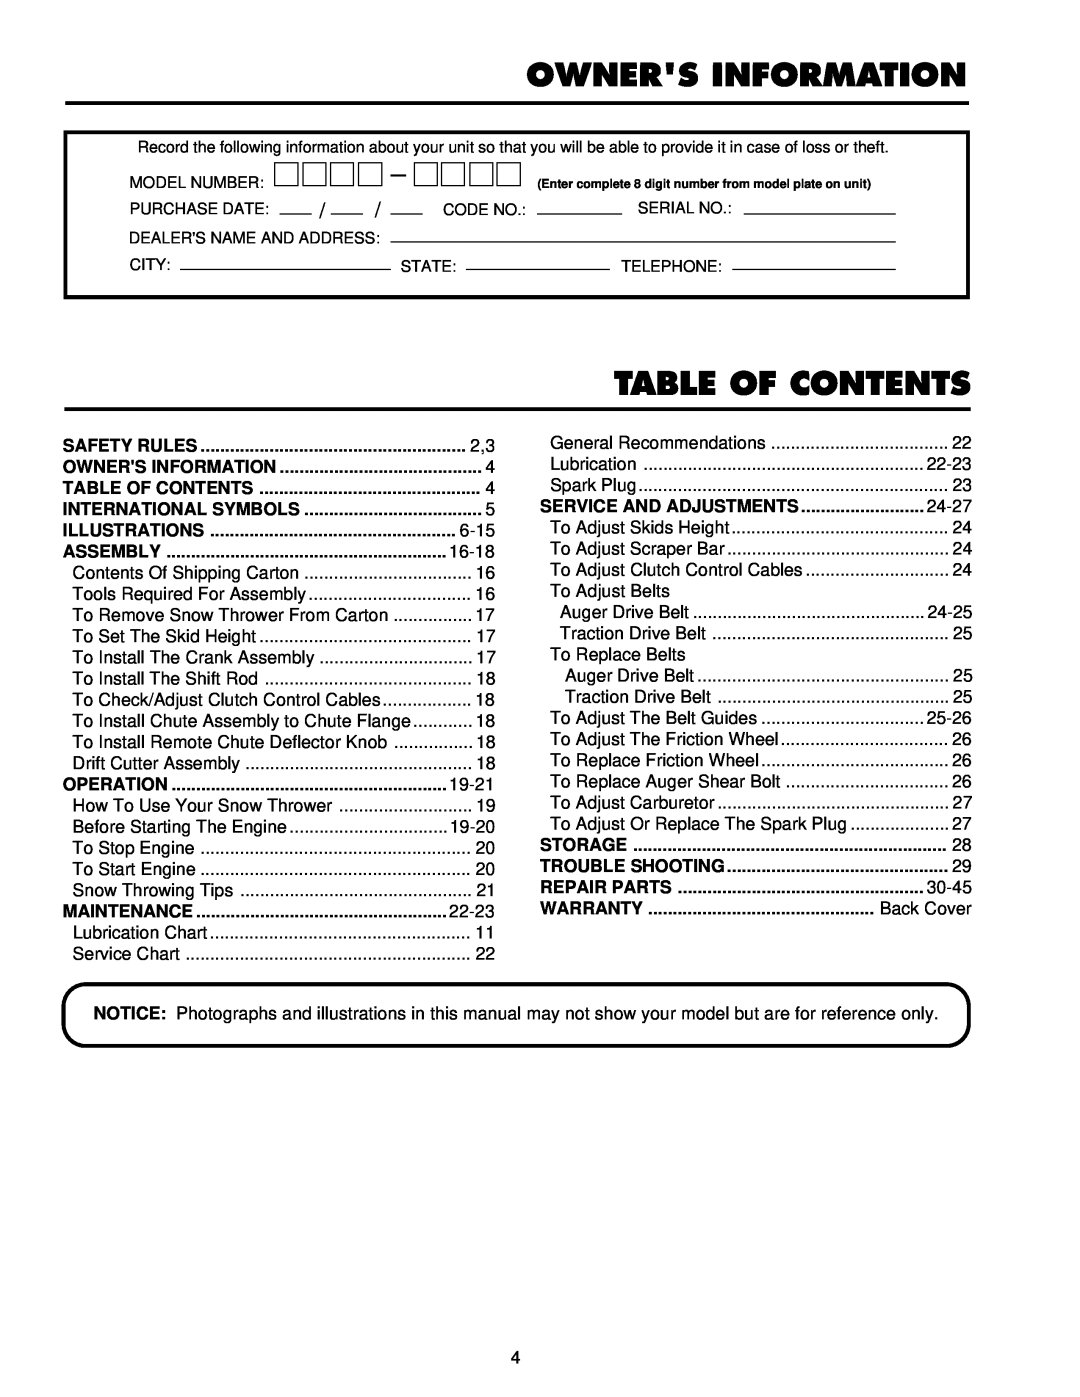 Husqvarna ST724 owner manual Owners Information, Table Of Contents 